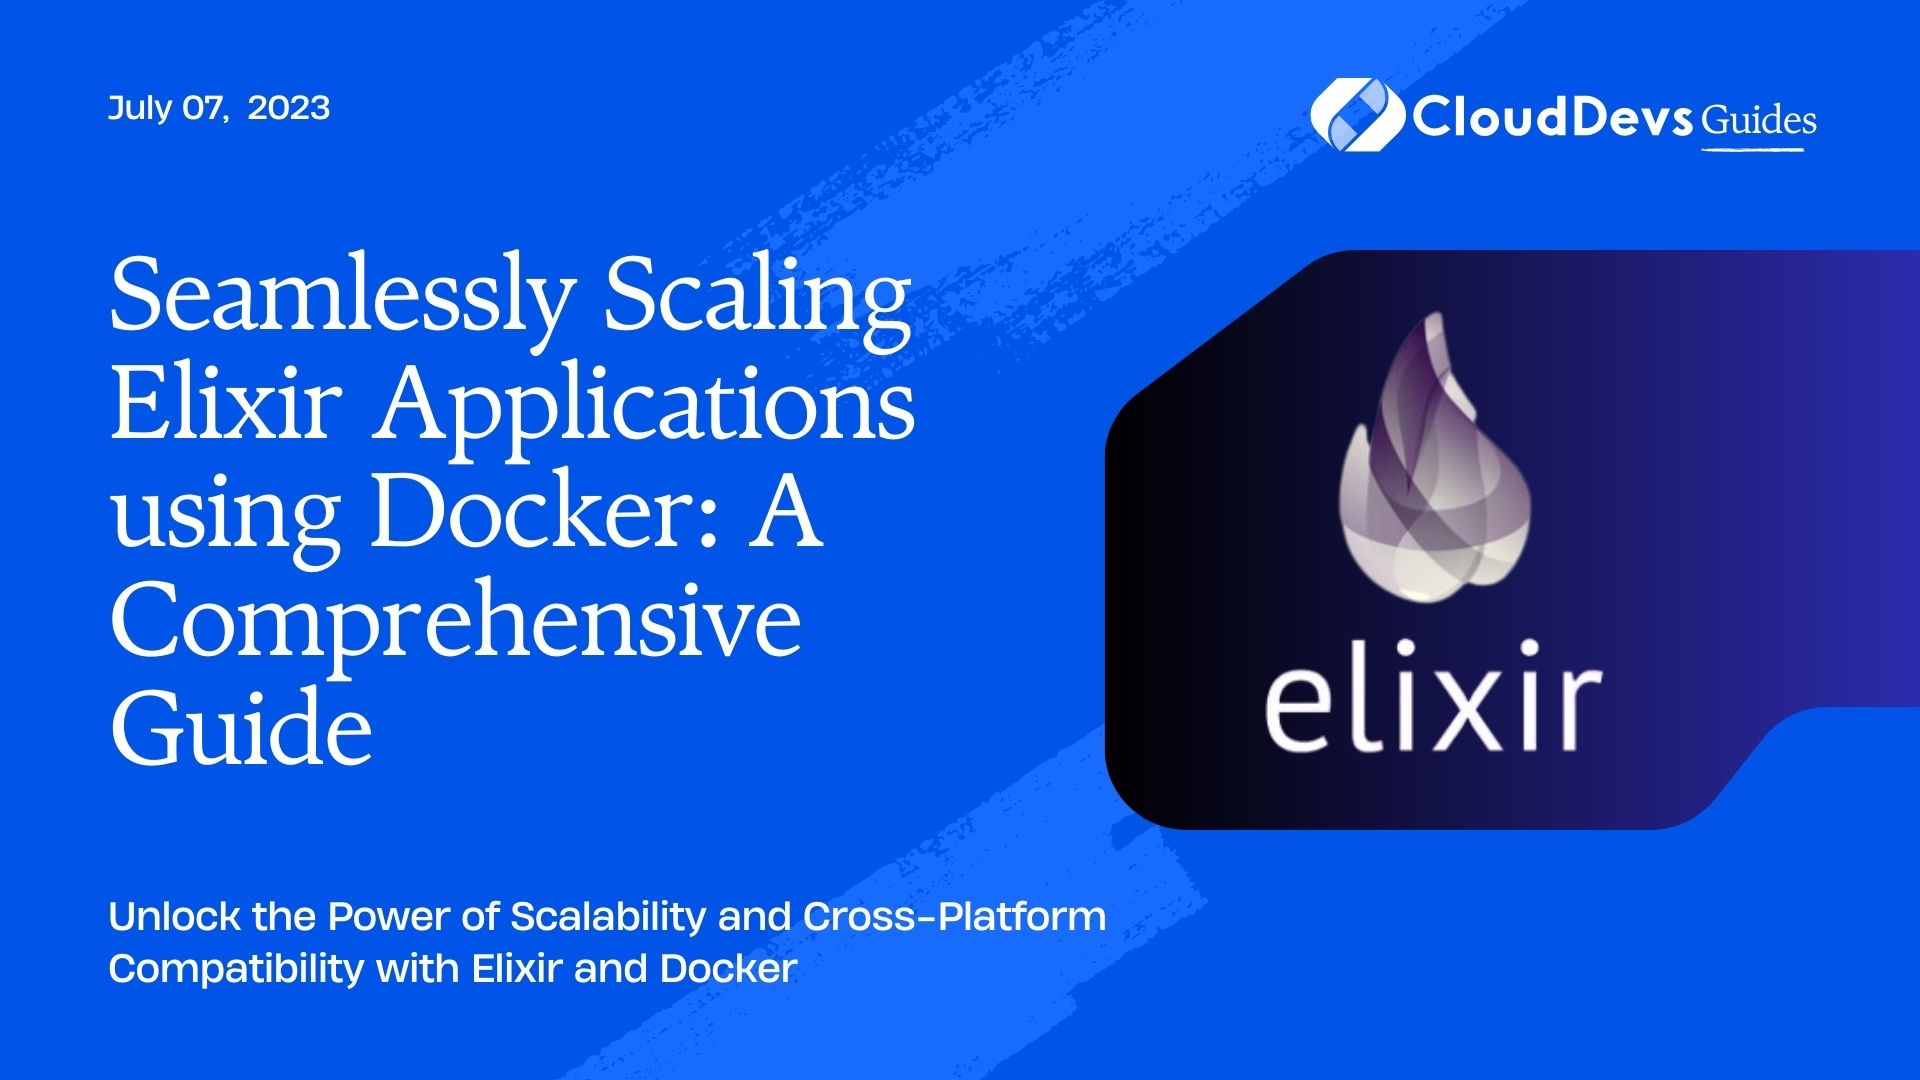 Seamlessly Scaling Elixir Applications using Docker: A Comprehensive Guide